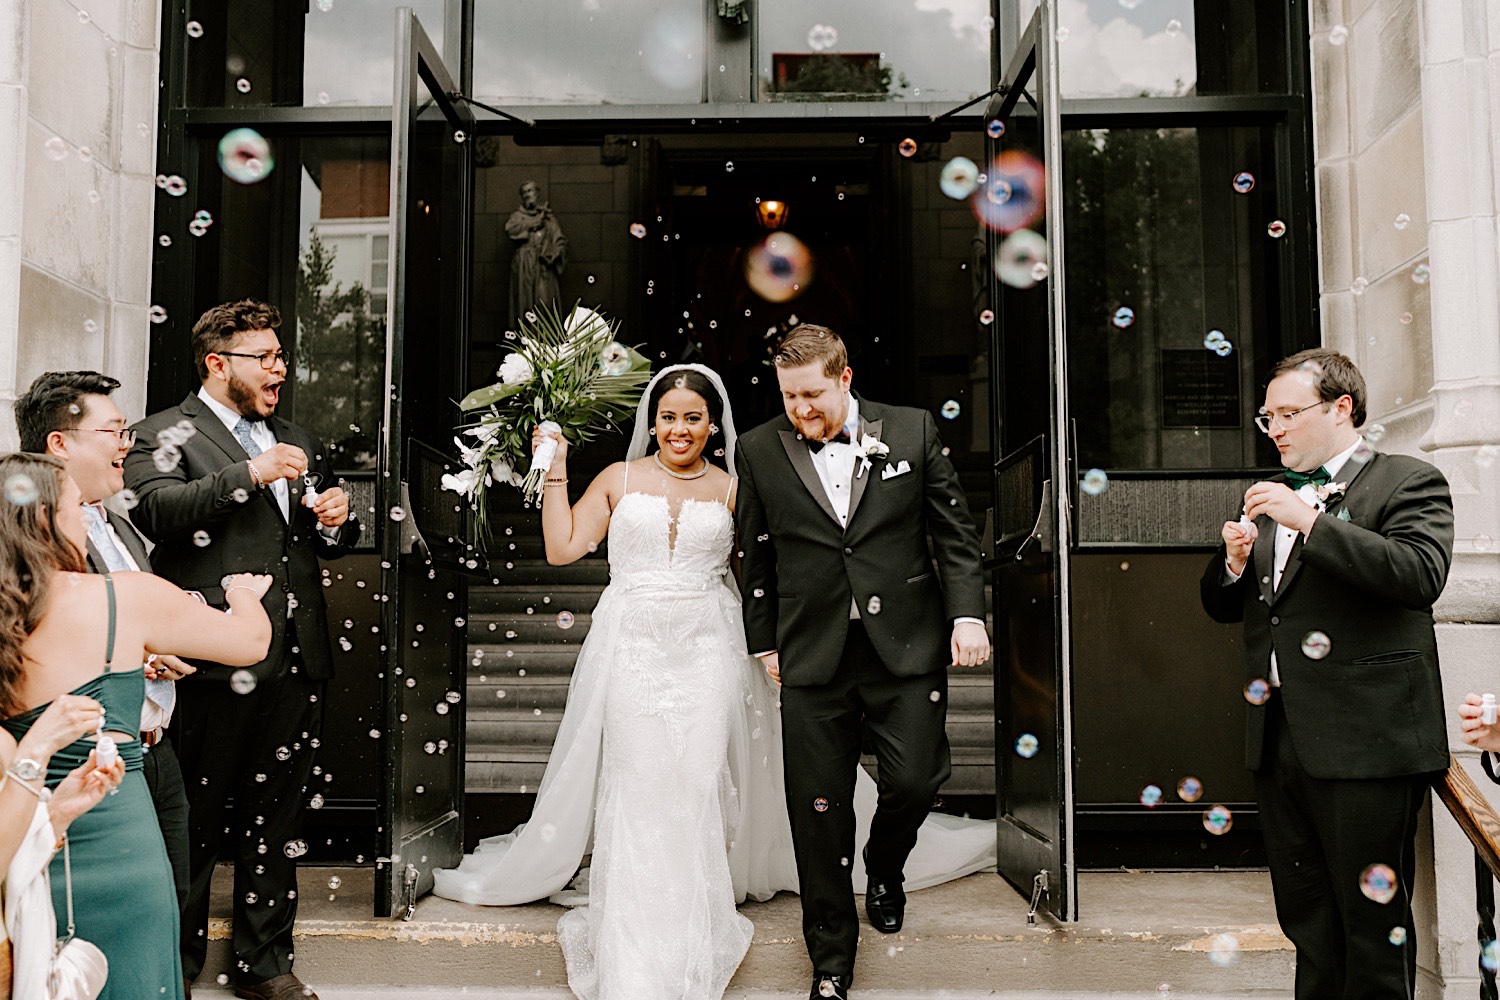 Guests of a wedding cheer and blow bubbles as the bride and groom exit the church and smile while holding hands after their wedding ceremony